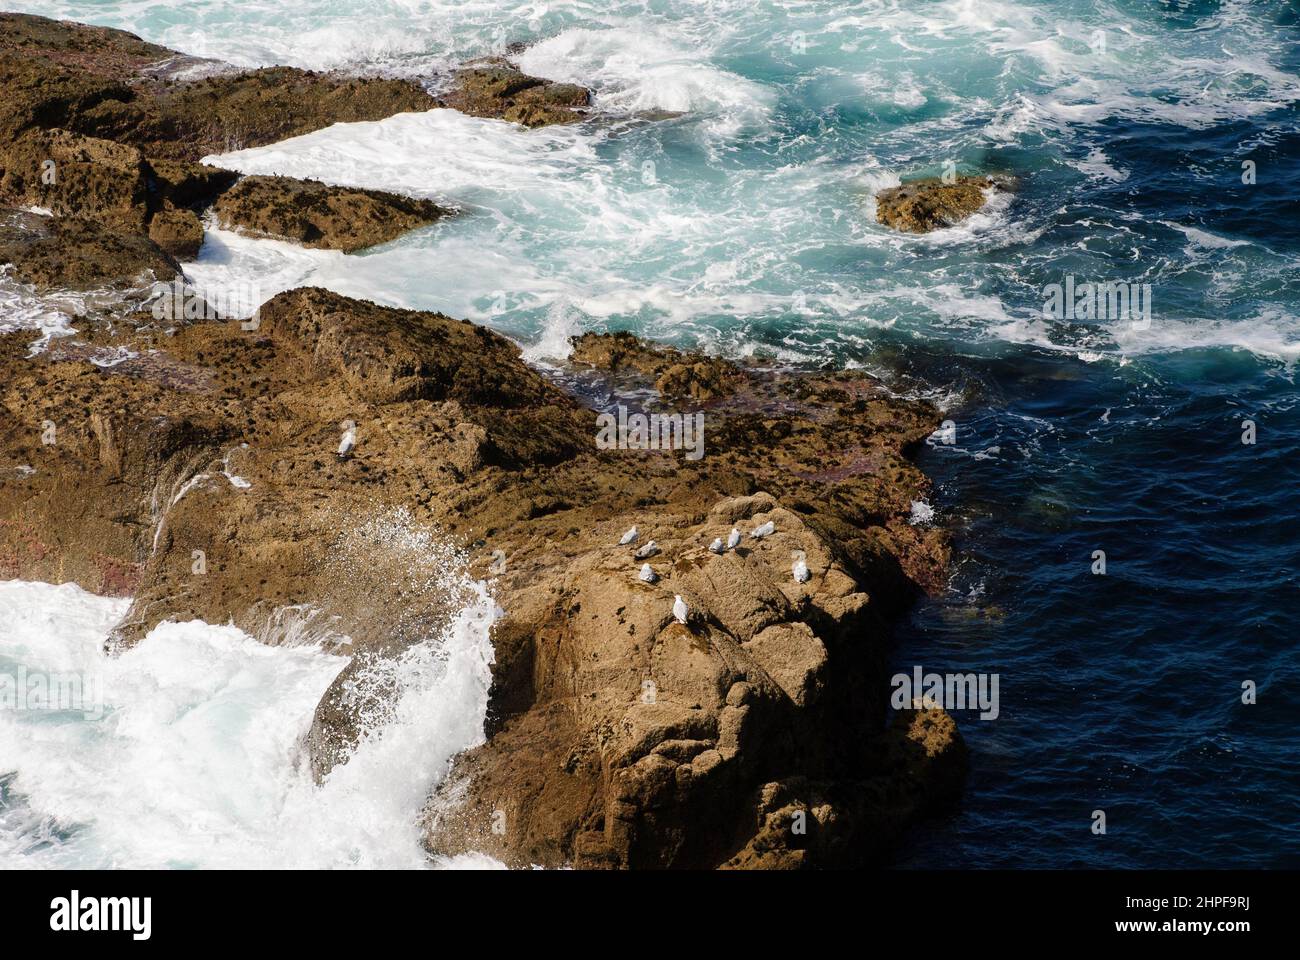 Rock with seagulls in the splashing waves of the sea, Land's End, Cornwall Stock Photo